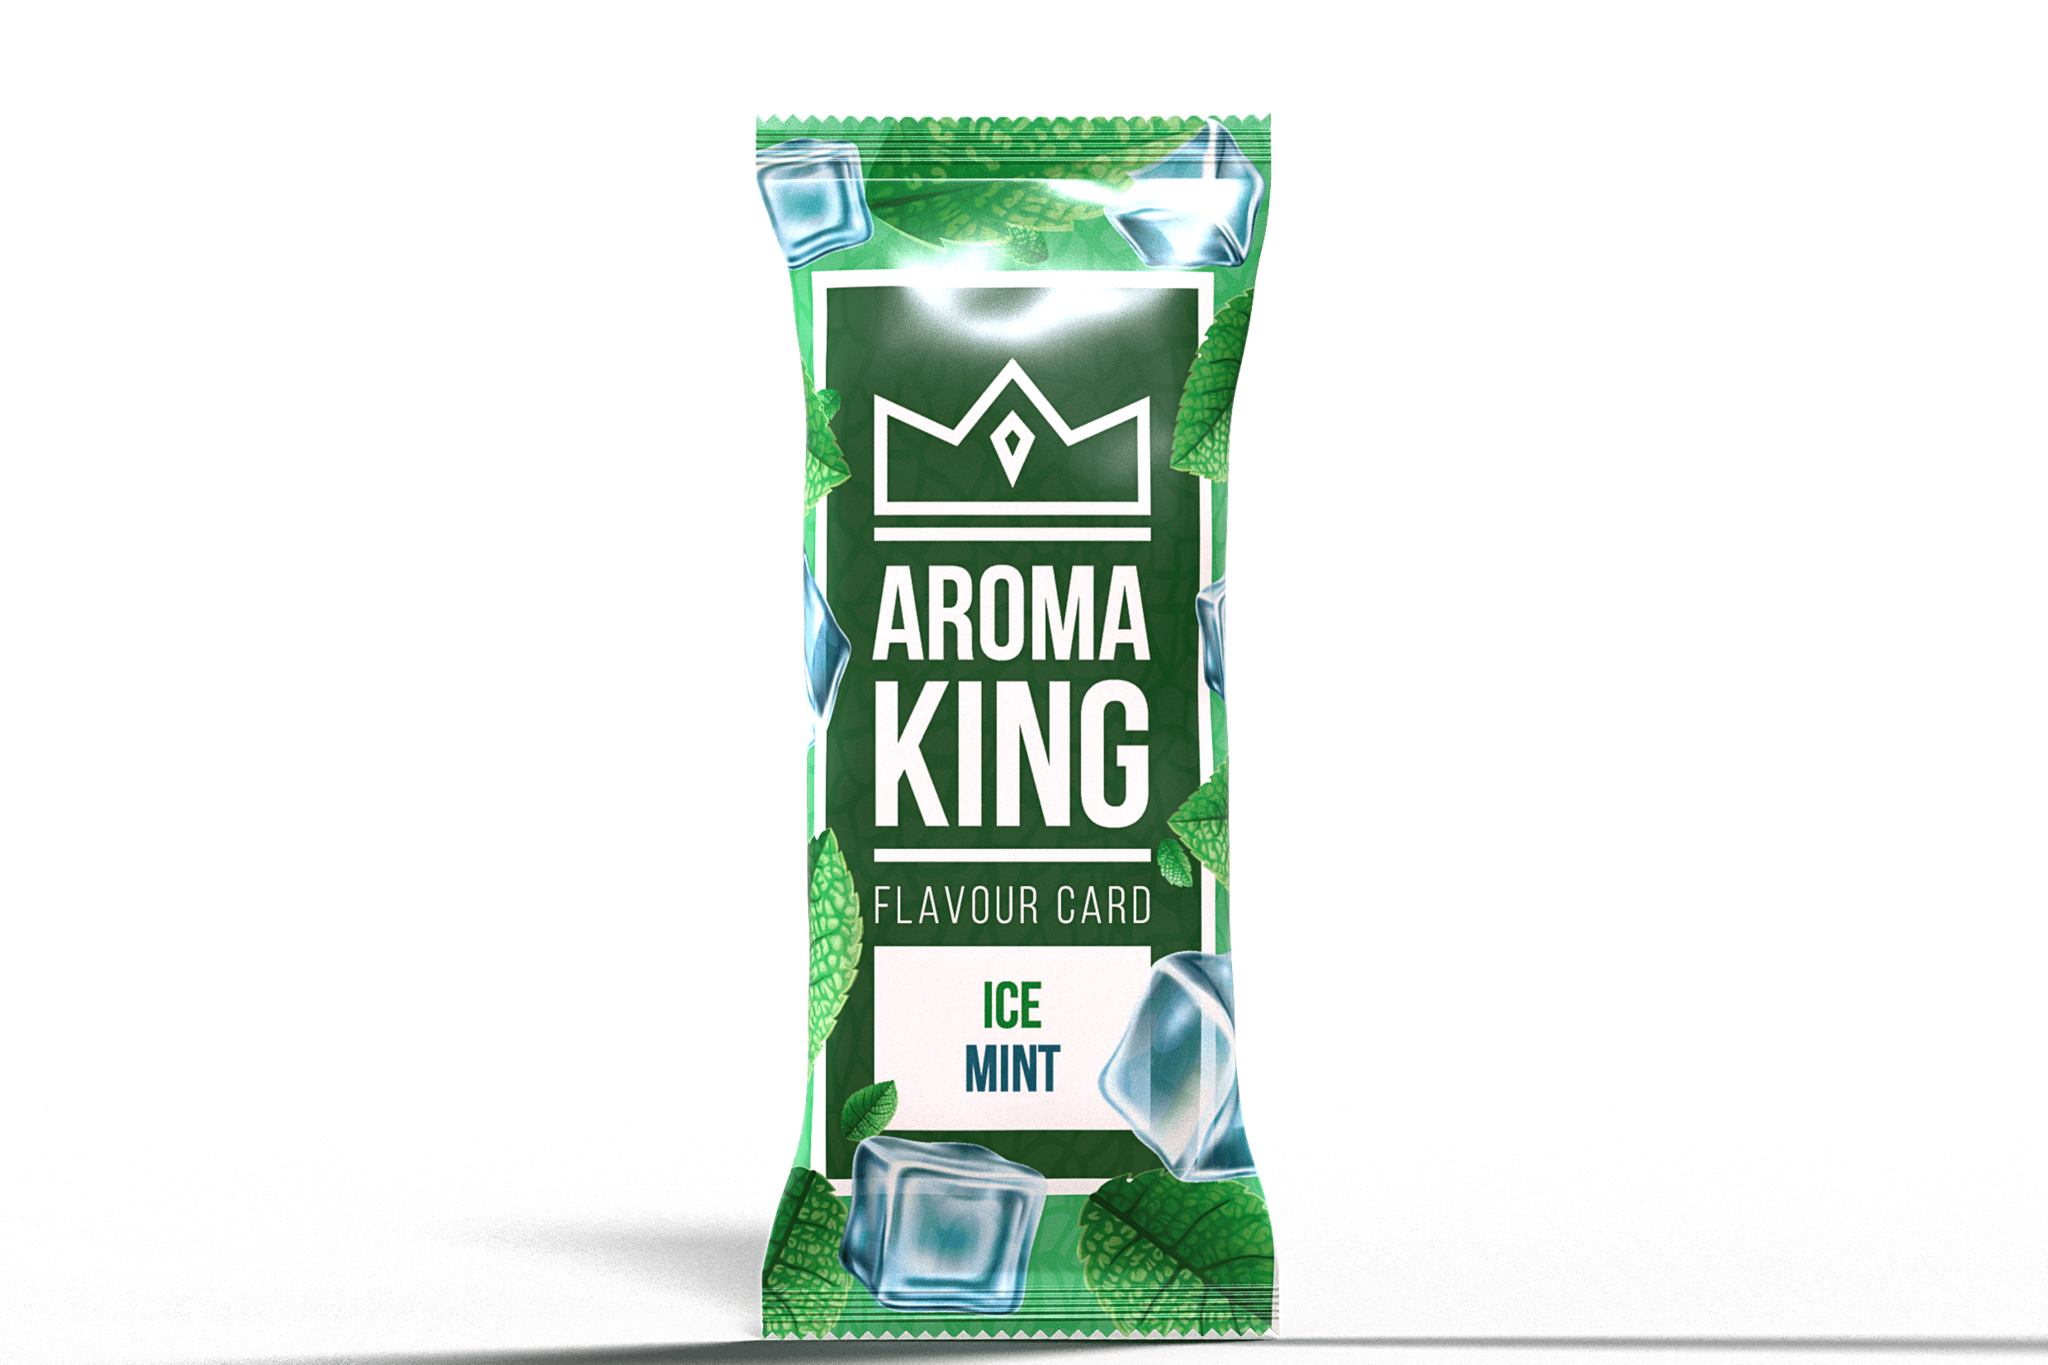 Aroma King Flavour Card Mint